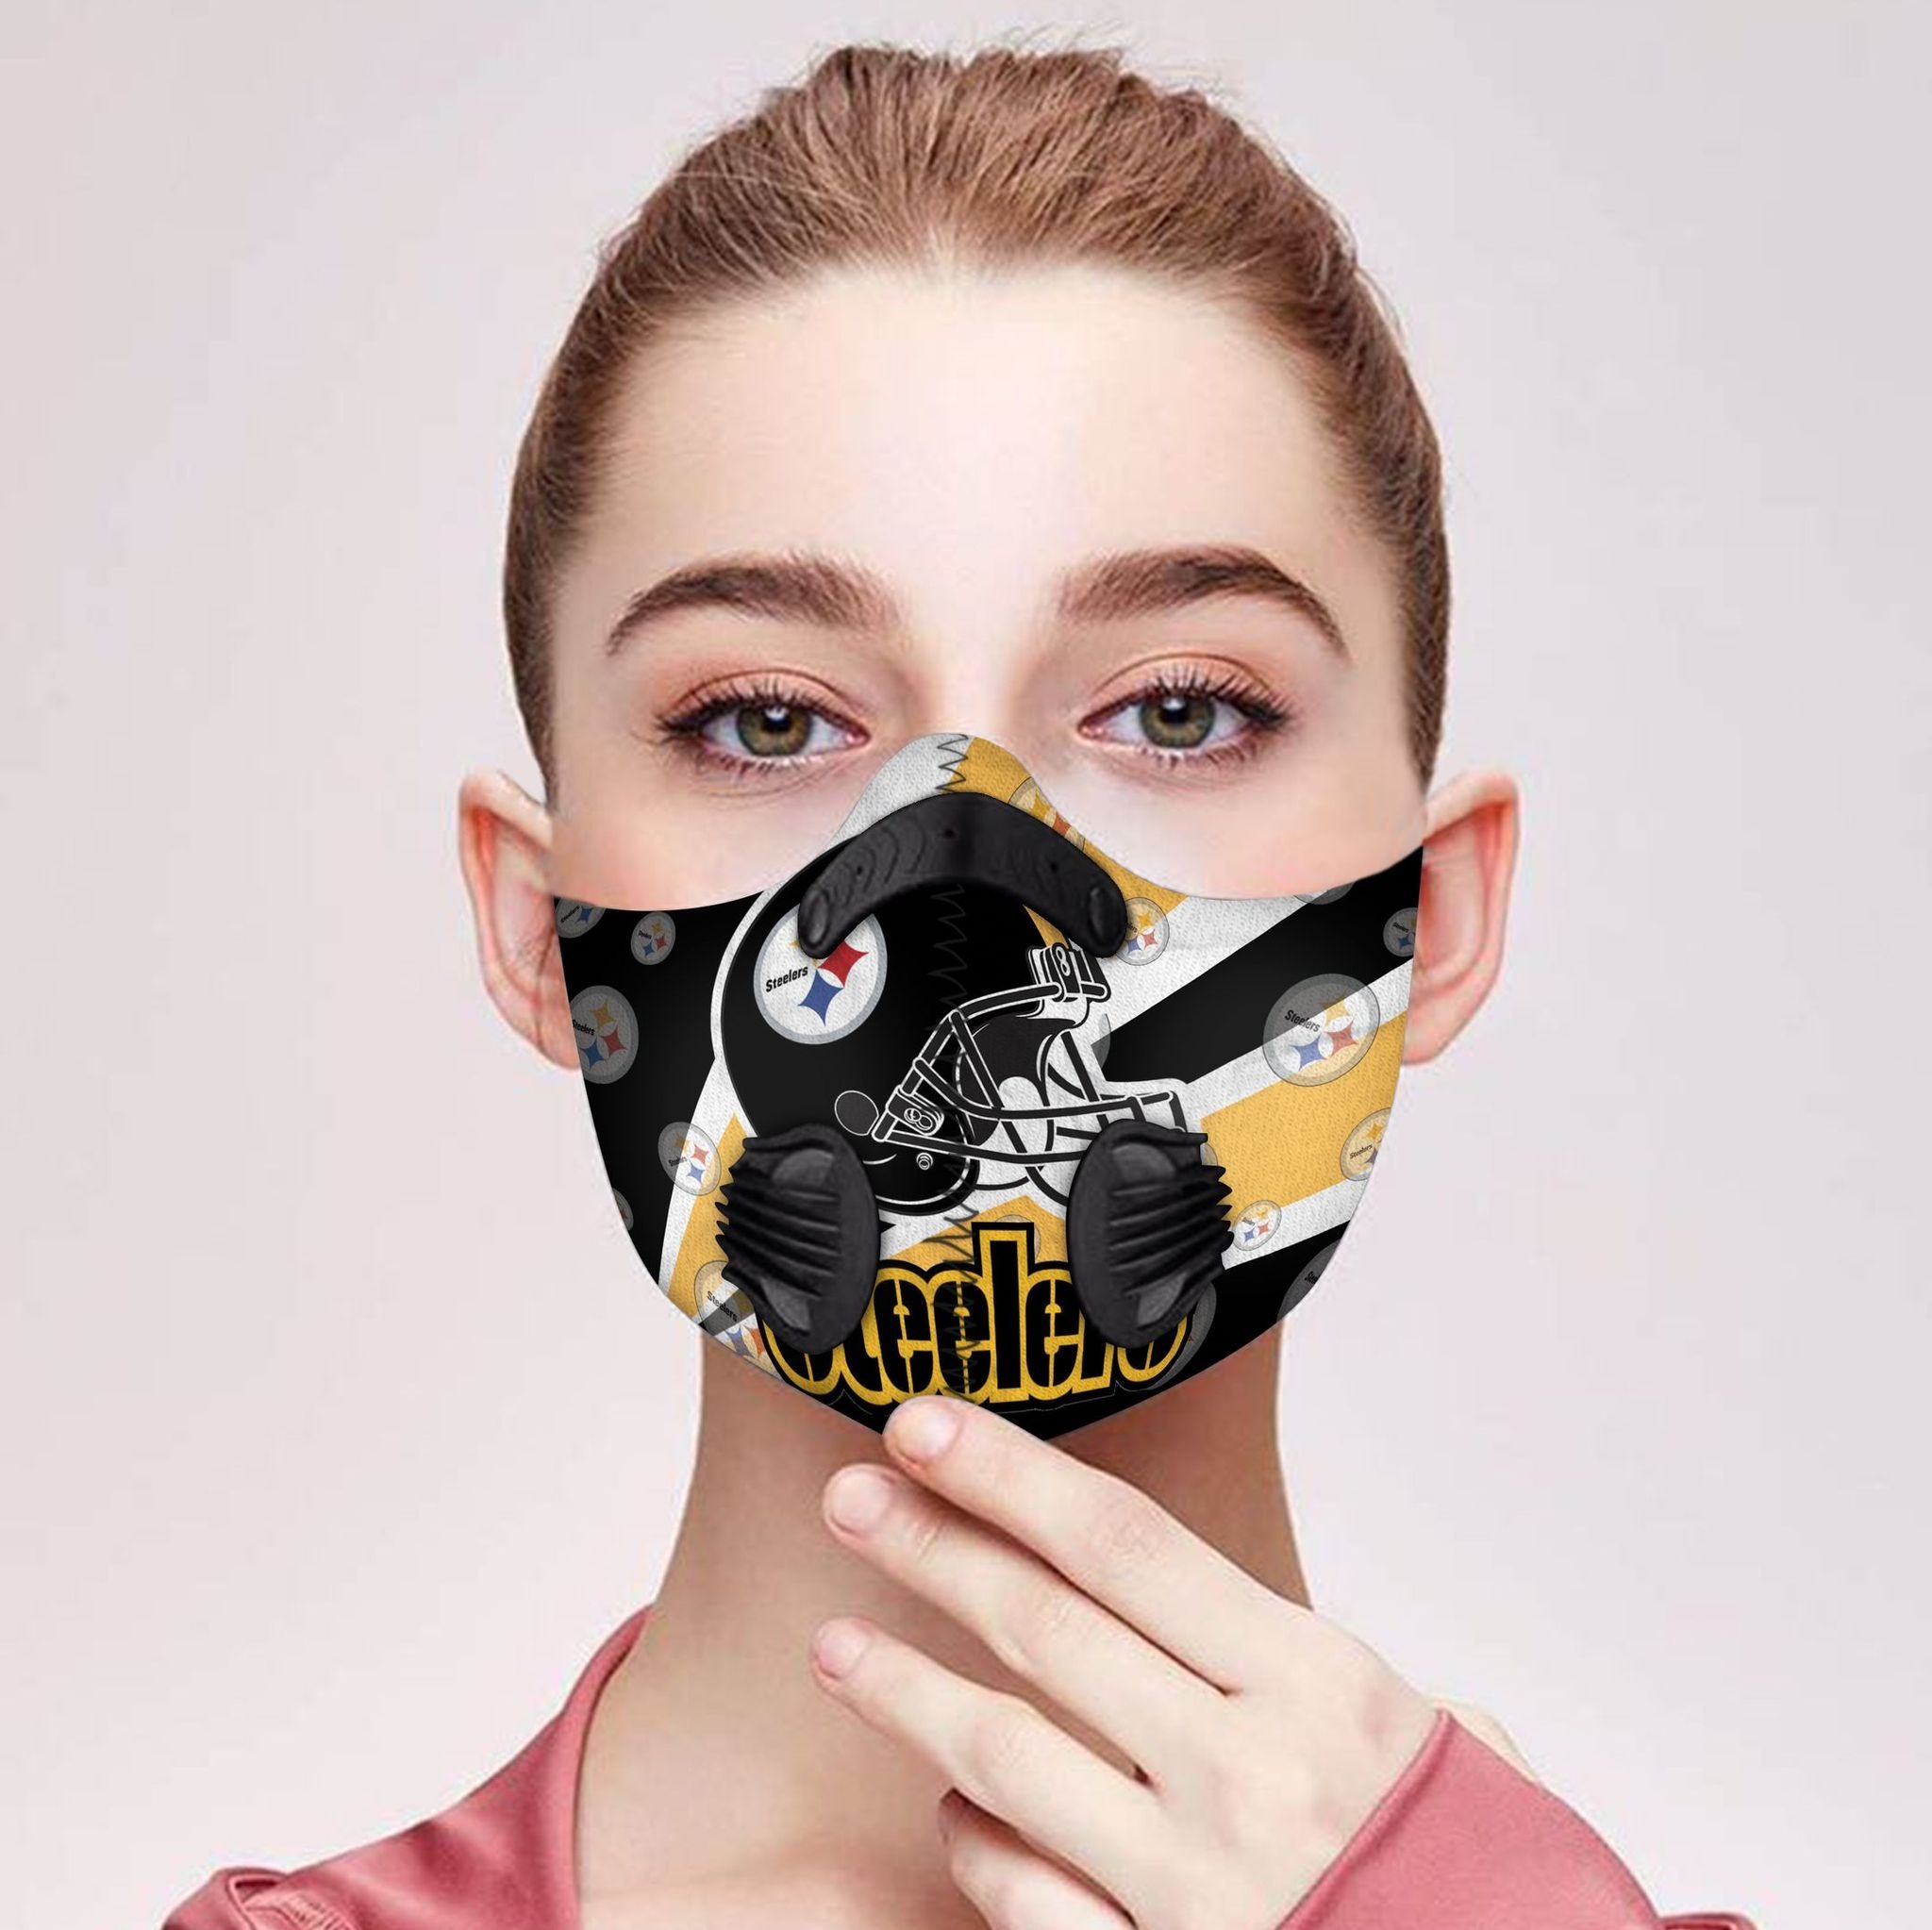 Pittburgh steelers filter face mask - Pic 1